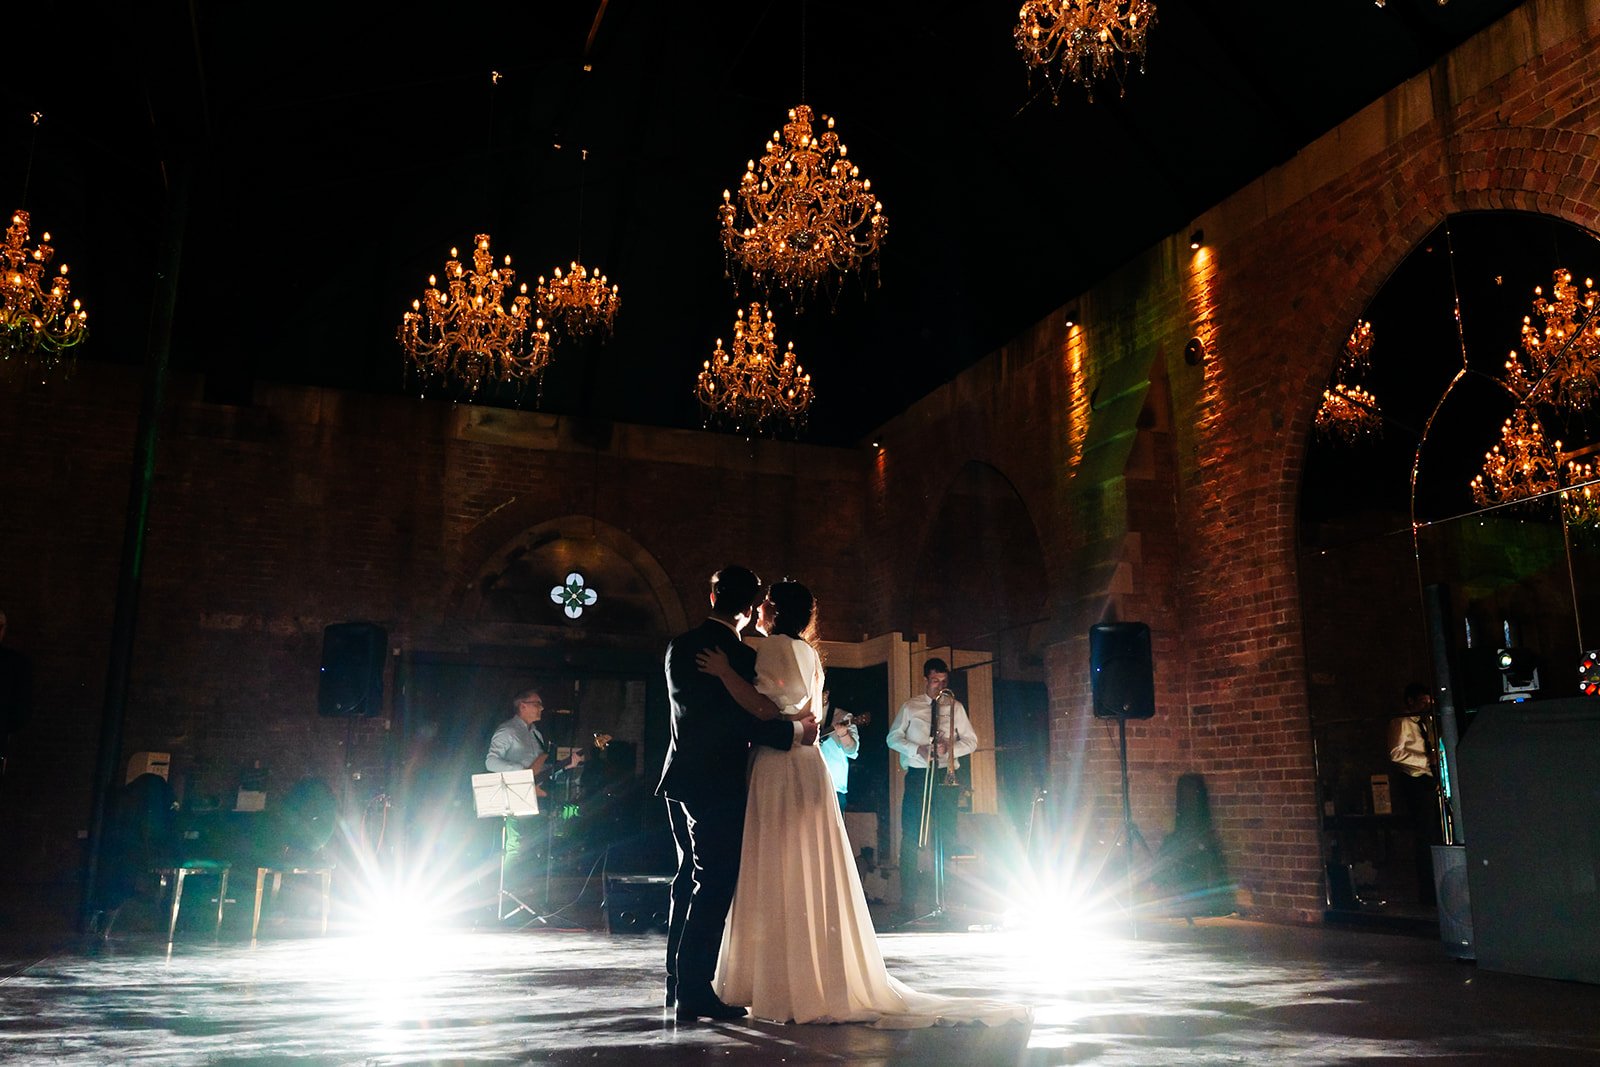 a dramatic shot of the bride and groom  dancing in an industrial room with chandeliers. wedding at dalton old pump house 